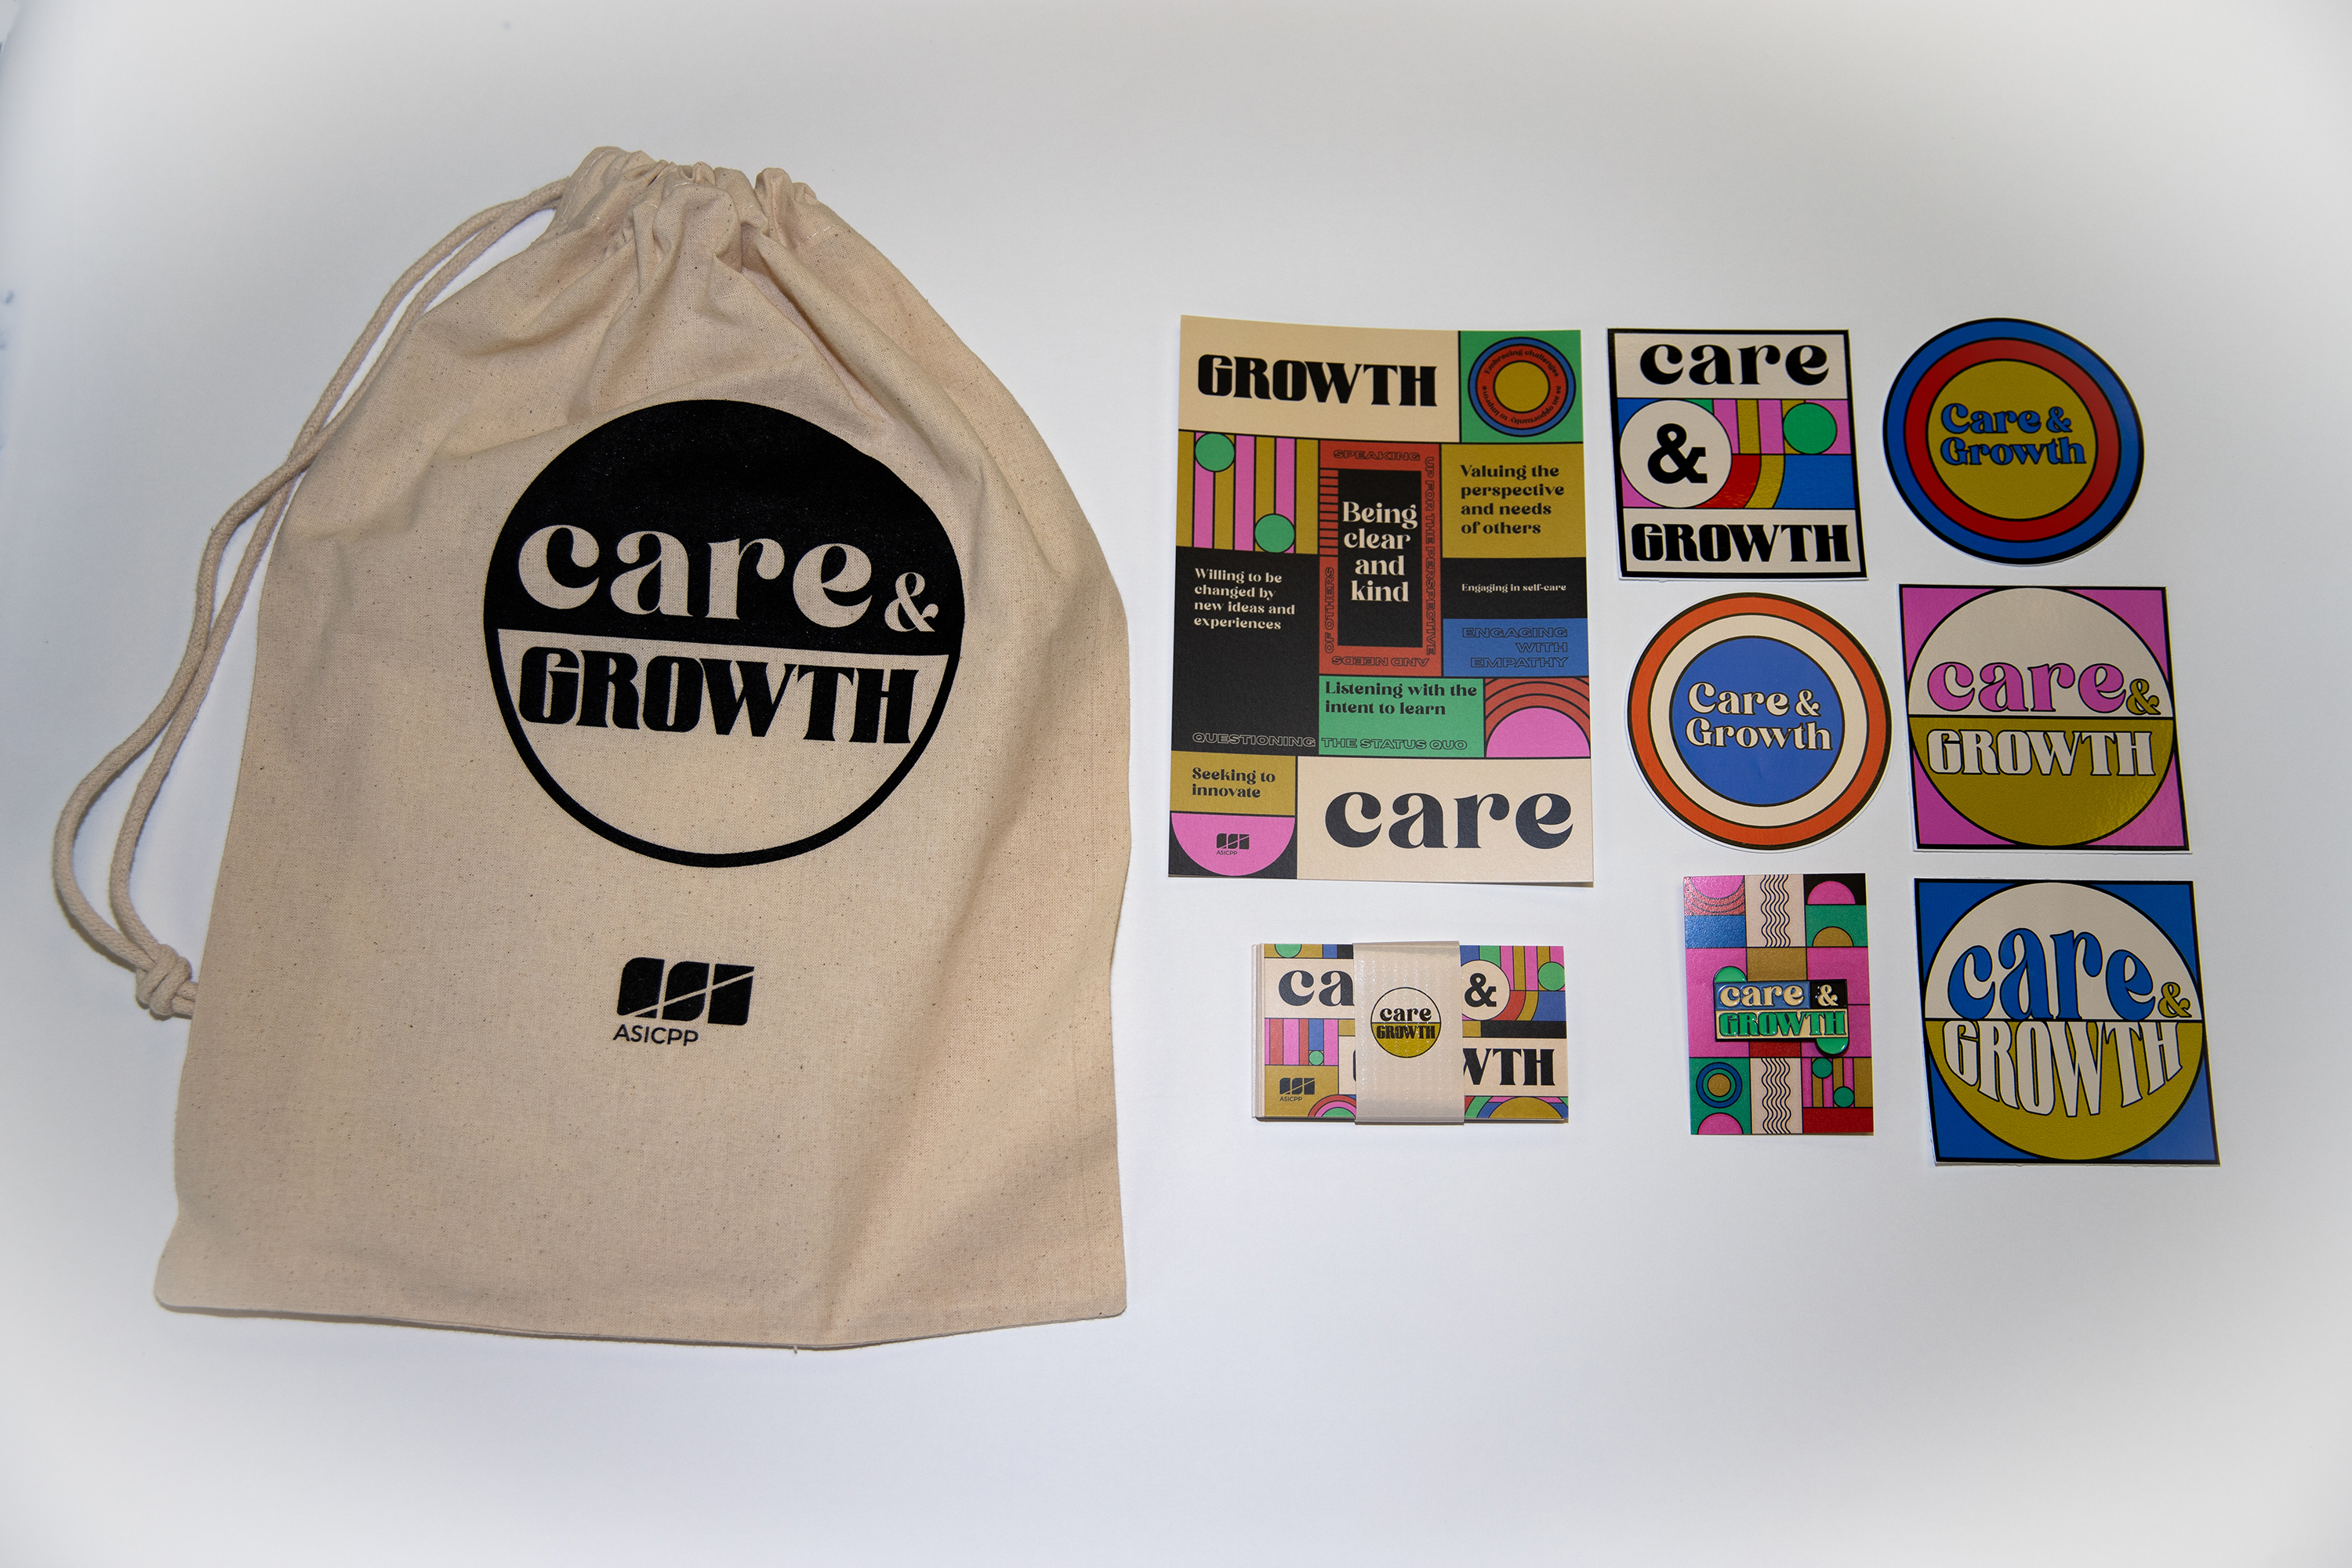 Care and Growth promotional items including a bag, cards, and stickers